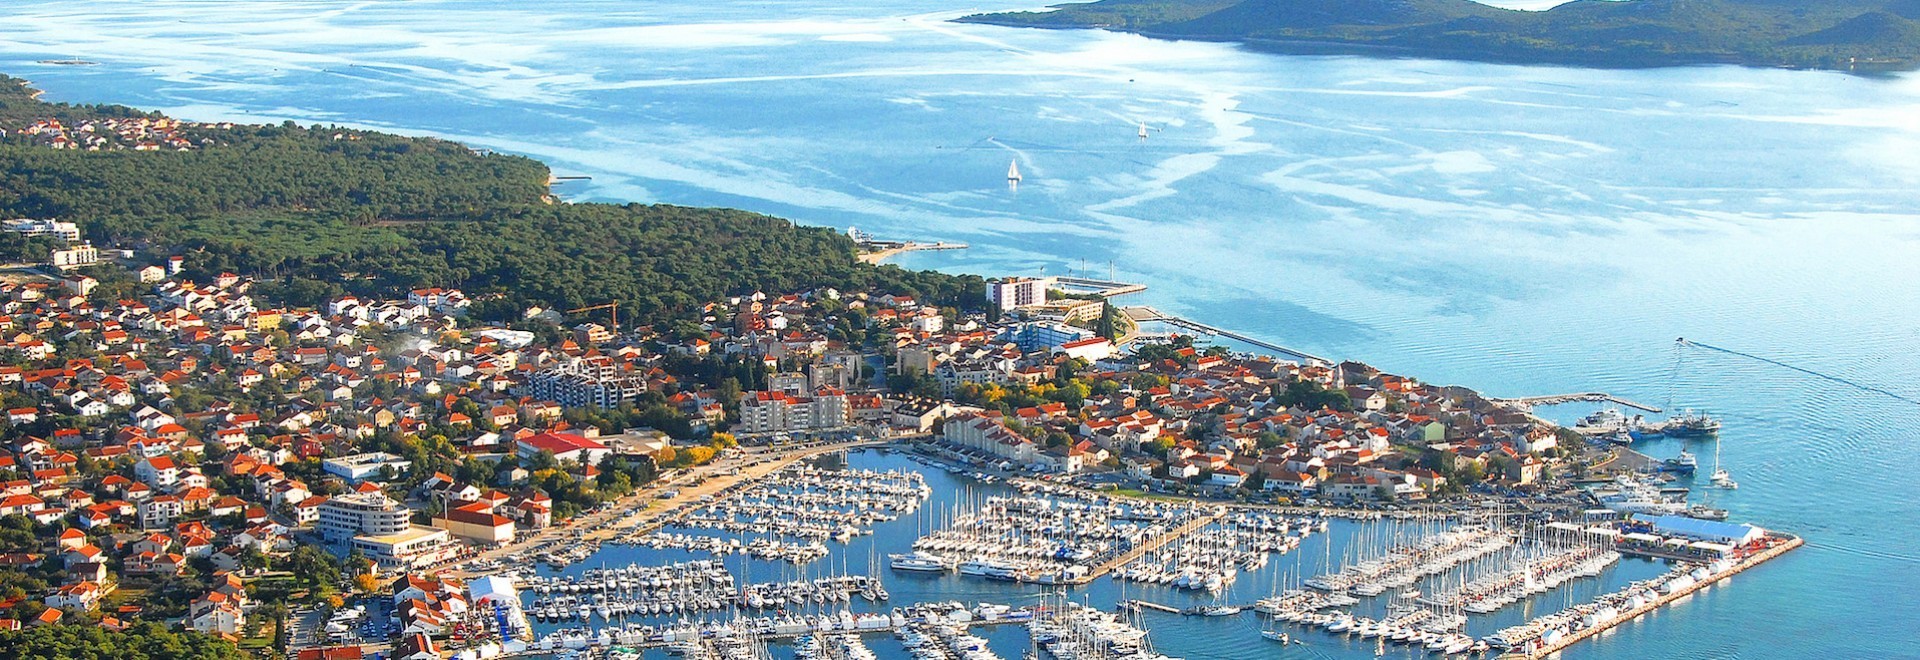 Tennis Vacations and Holidays in Croatia - Book tennis resorts and tennis camps in Croatia